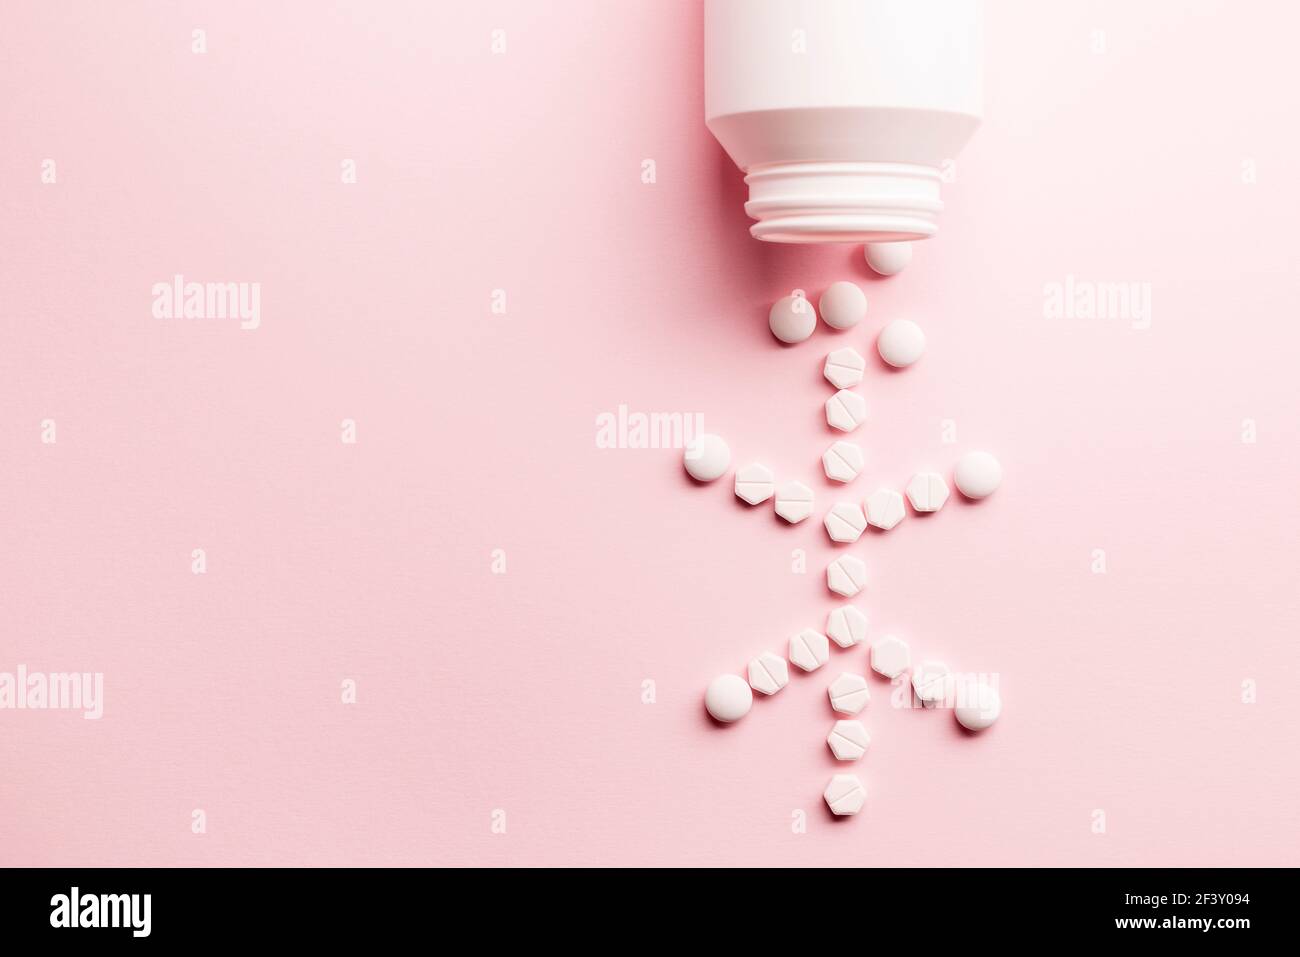 Medicine pills cell shape with bottle on pink background Stock Photo